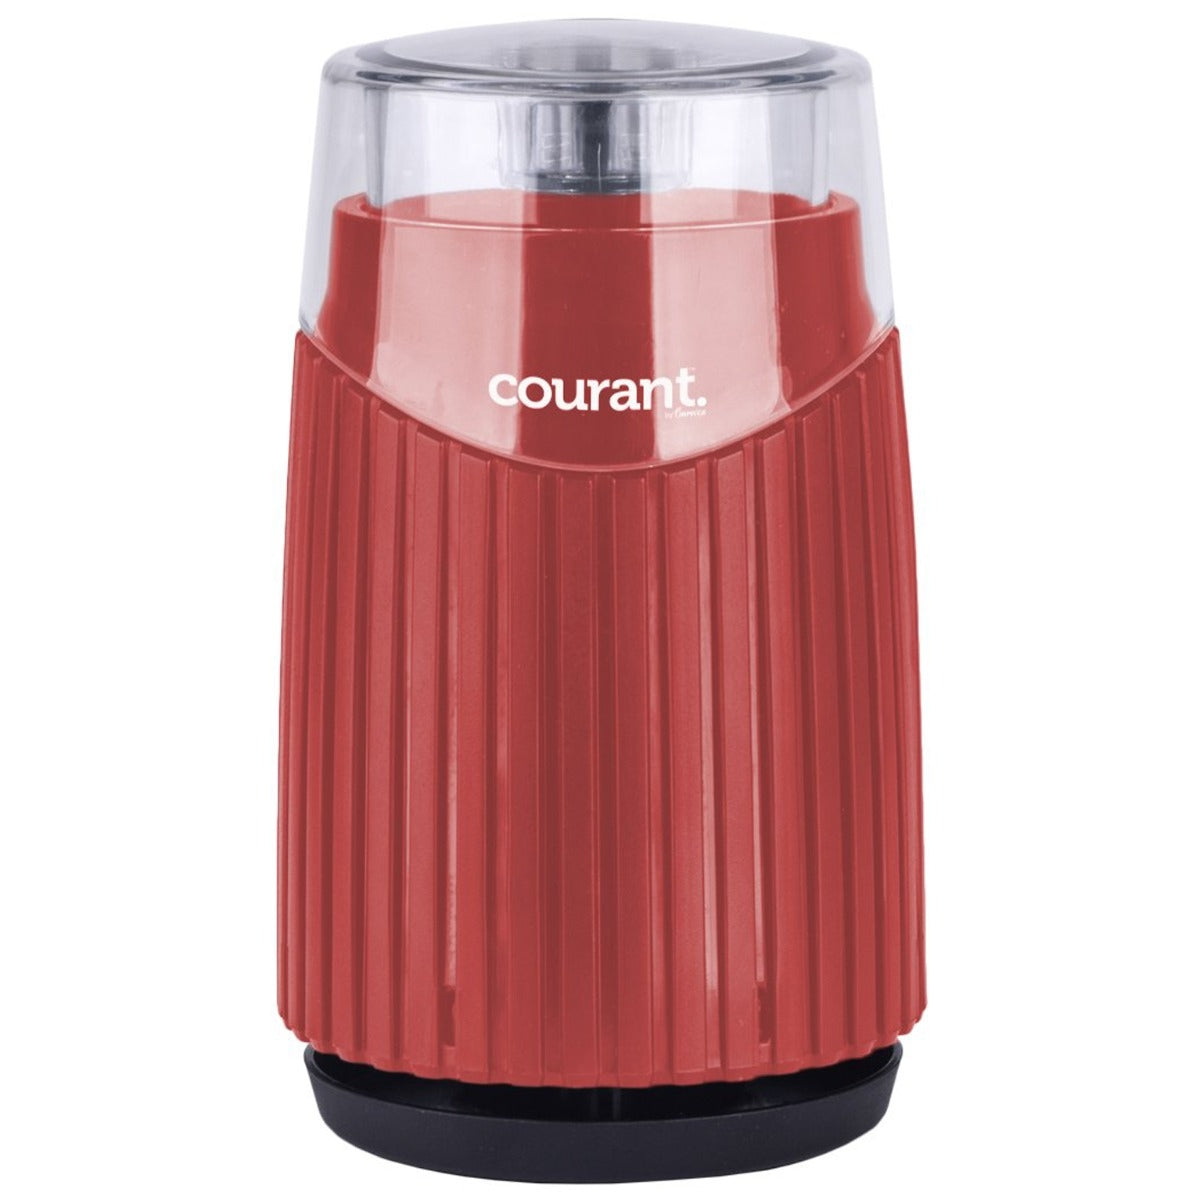 Courant Electric Motor Coffee Grinder - Assorted Colors / Red